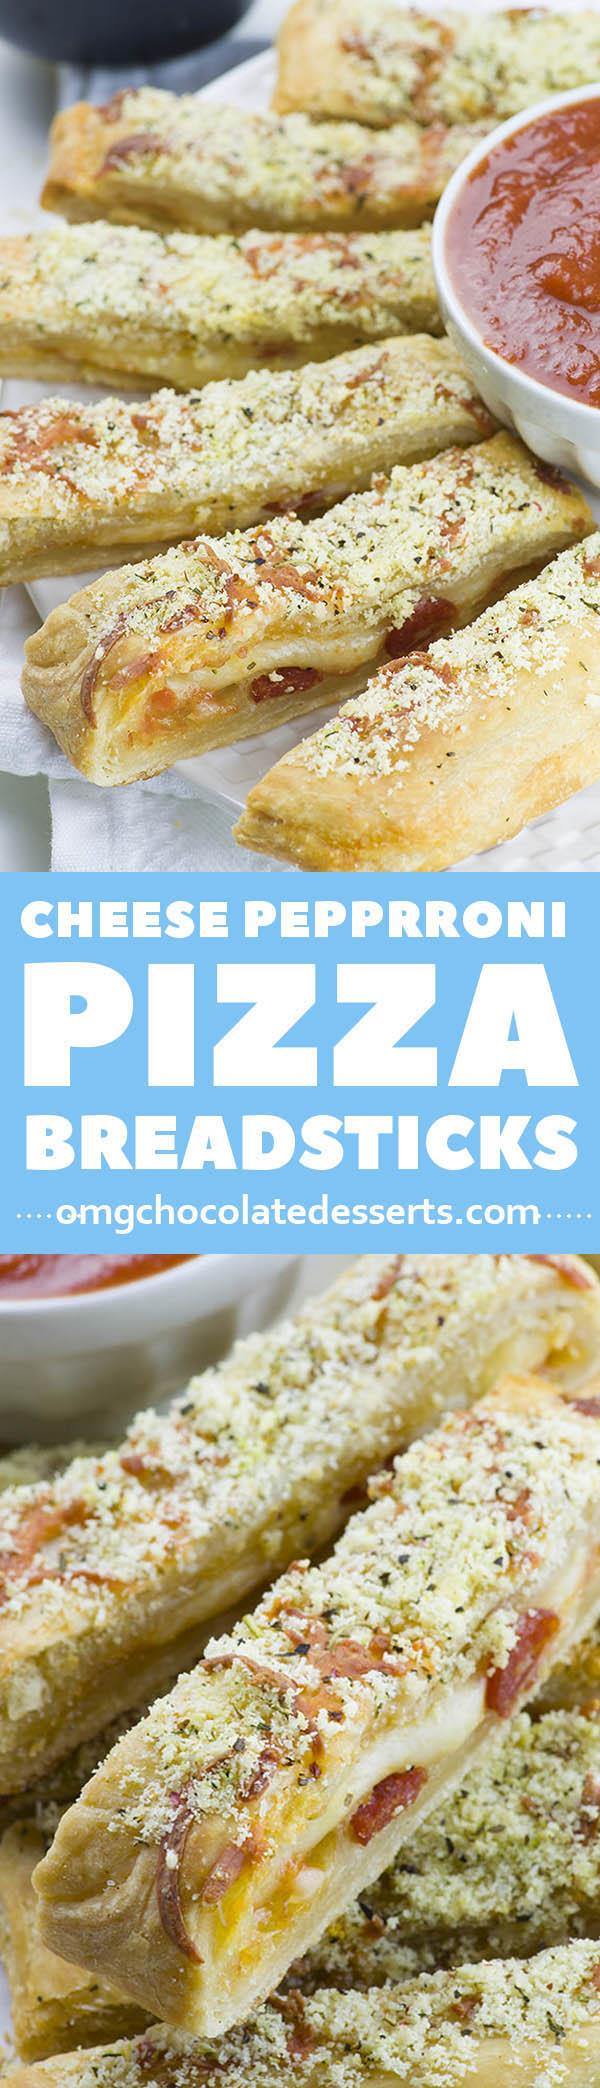 Need a last minute snack for a Game Day? Easy Cheesy Pizza Breadsticks is crowd-pleasing appetizer recipe.